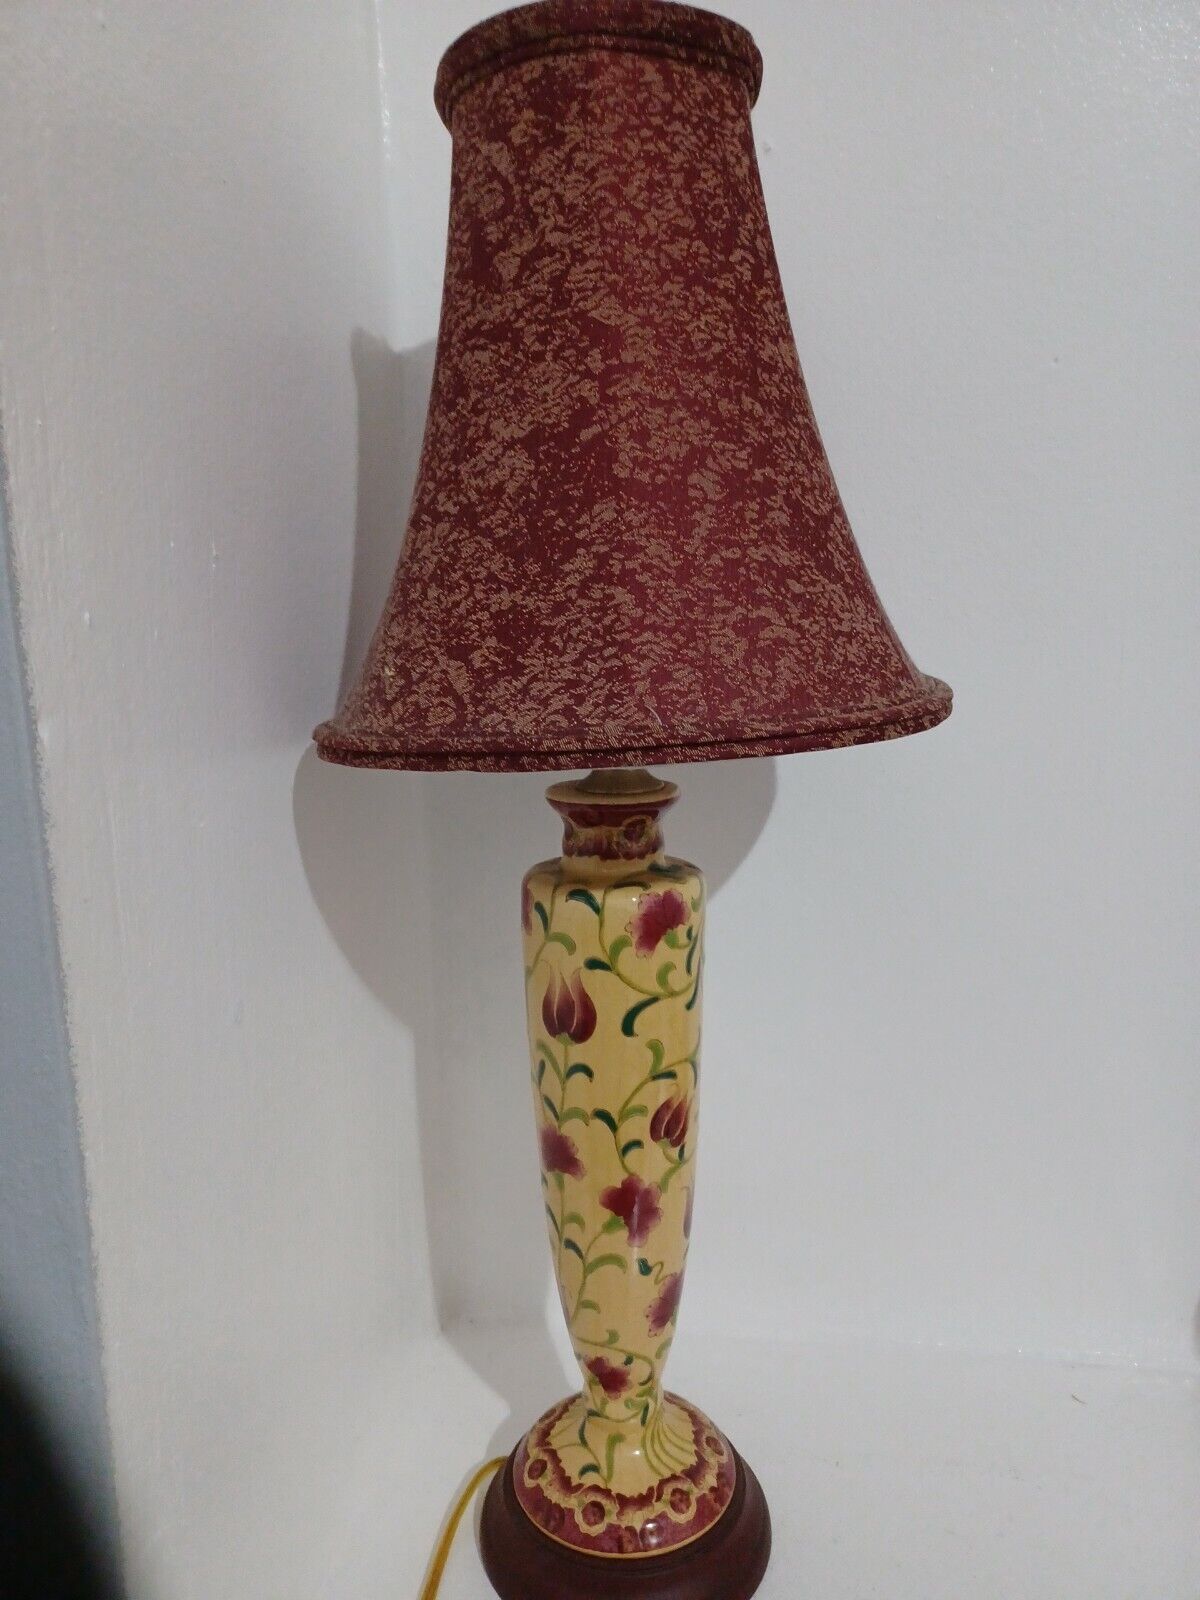 Accent Vtg 70's yellow Ceramic Table Lamp Big Bright Spring Floral Design 